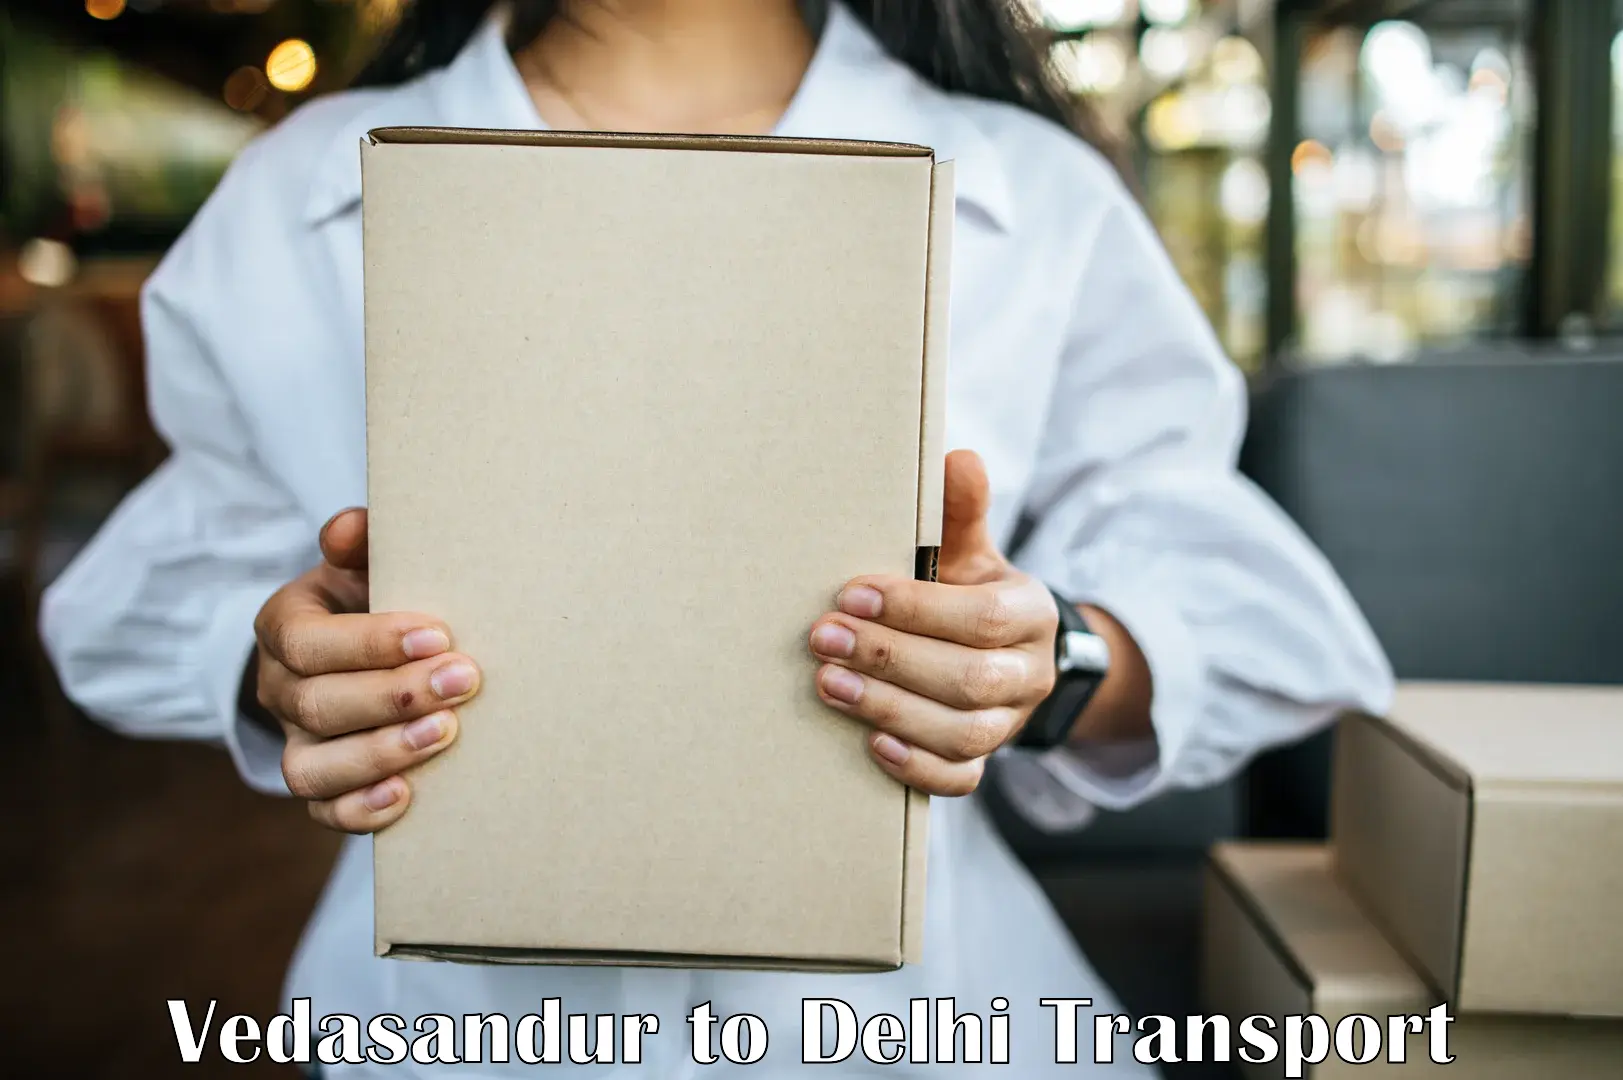 Vehicle transport services Vedasandur to NCR